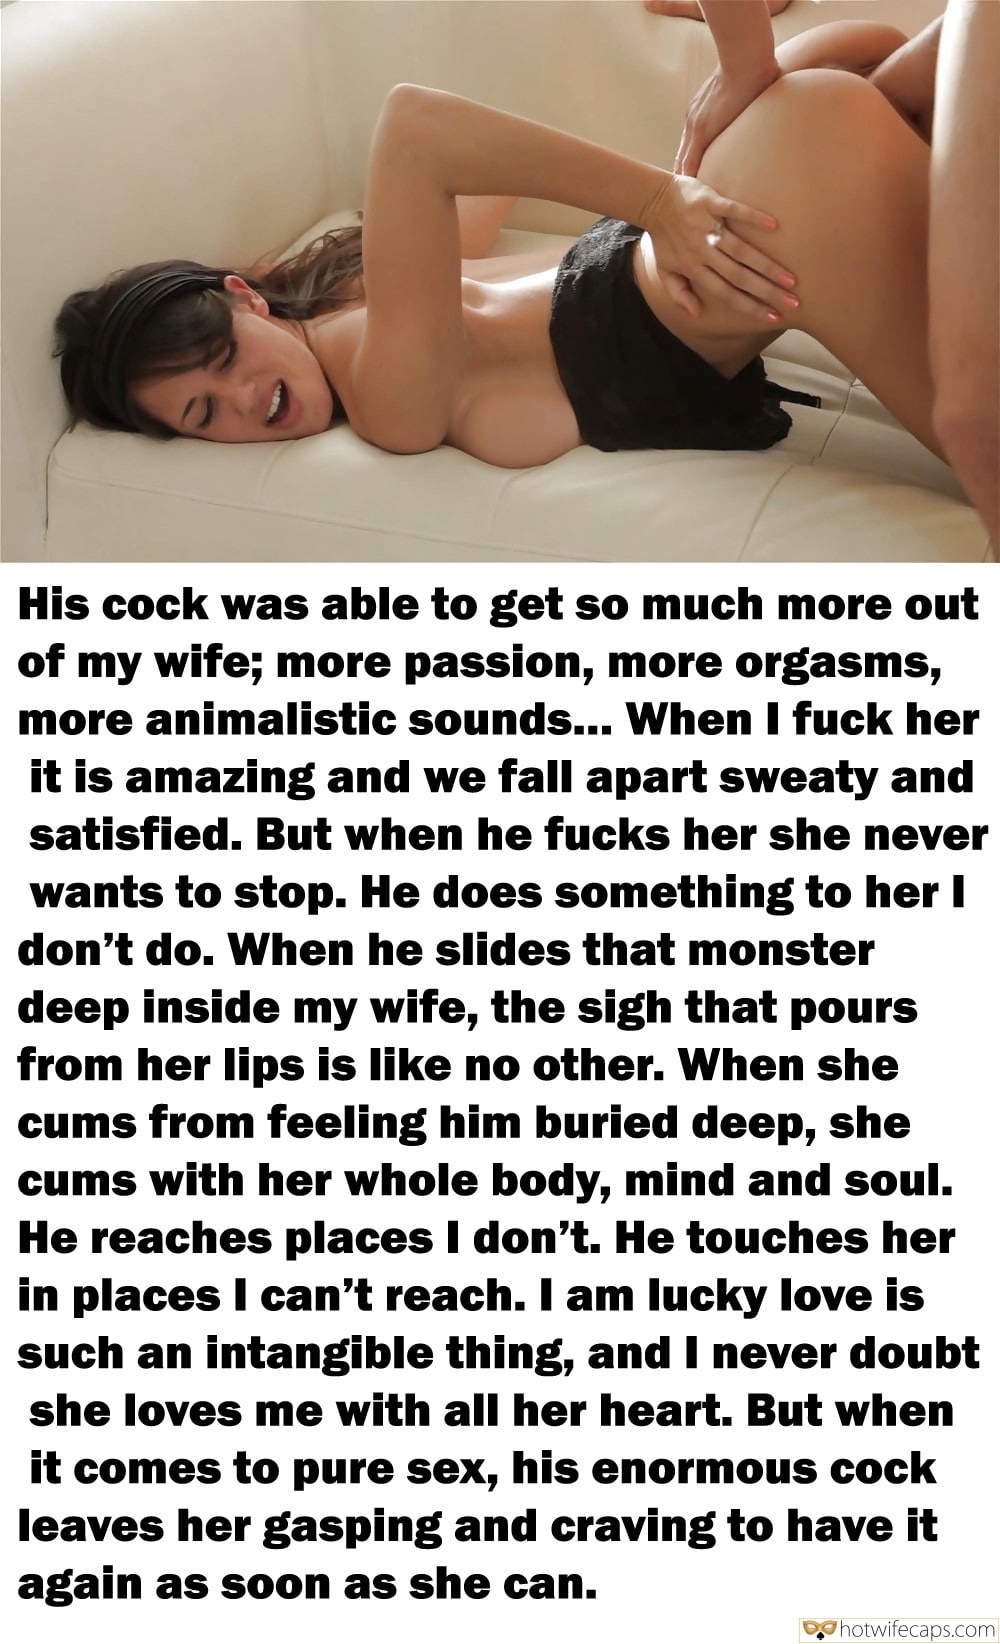 Cuckold Stories Bigger Cock hotwife caption: His cock was able to get so much more out of my wife; more passion, more orgasms, more animalistic sounds… When I fuck her it is amazing and we fall apart sweaty and satisfied. But when he fucks her she...